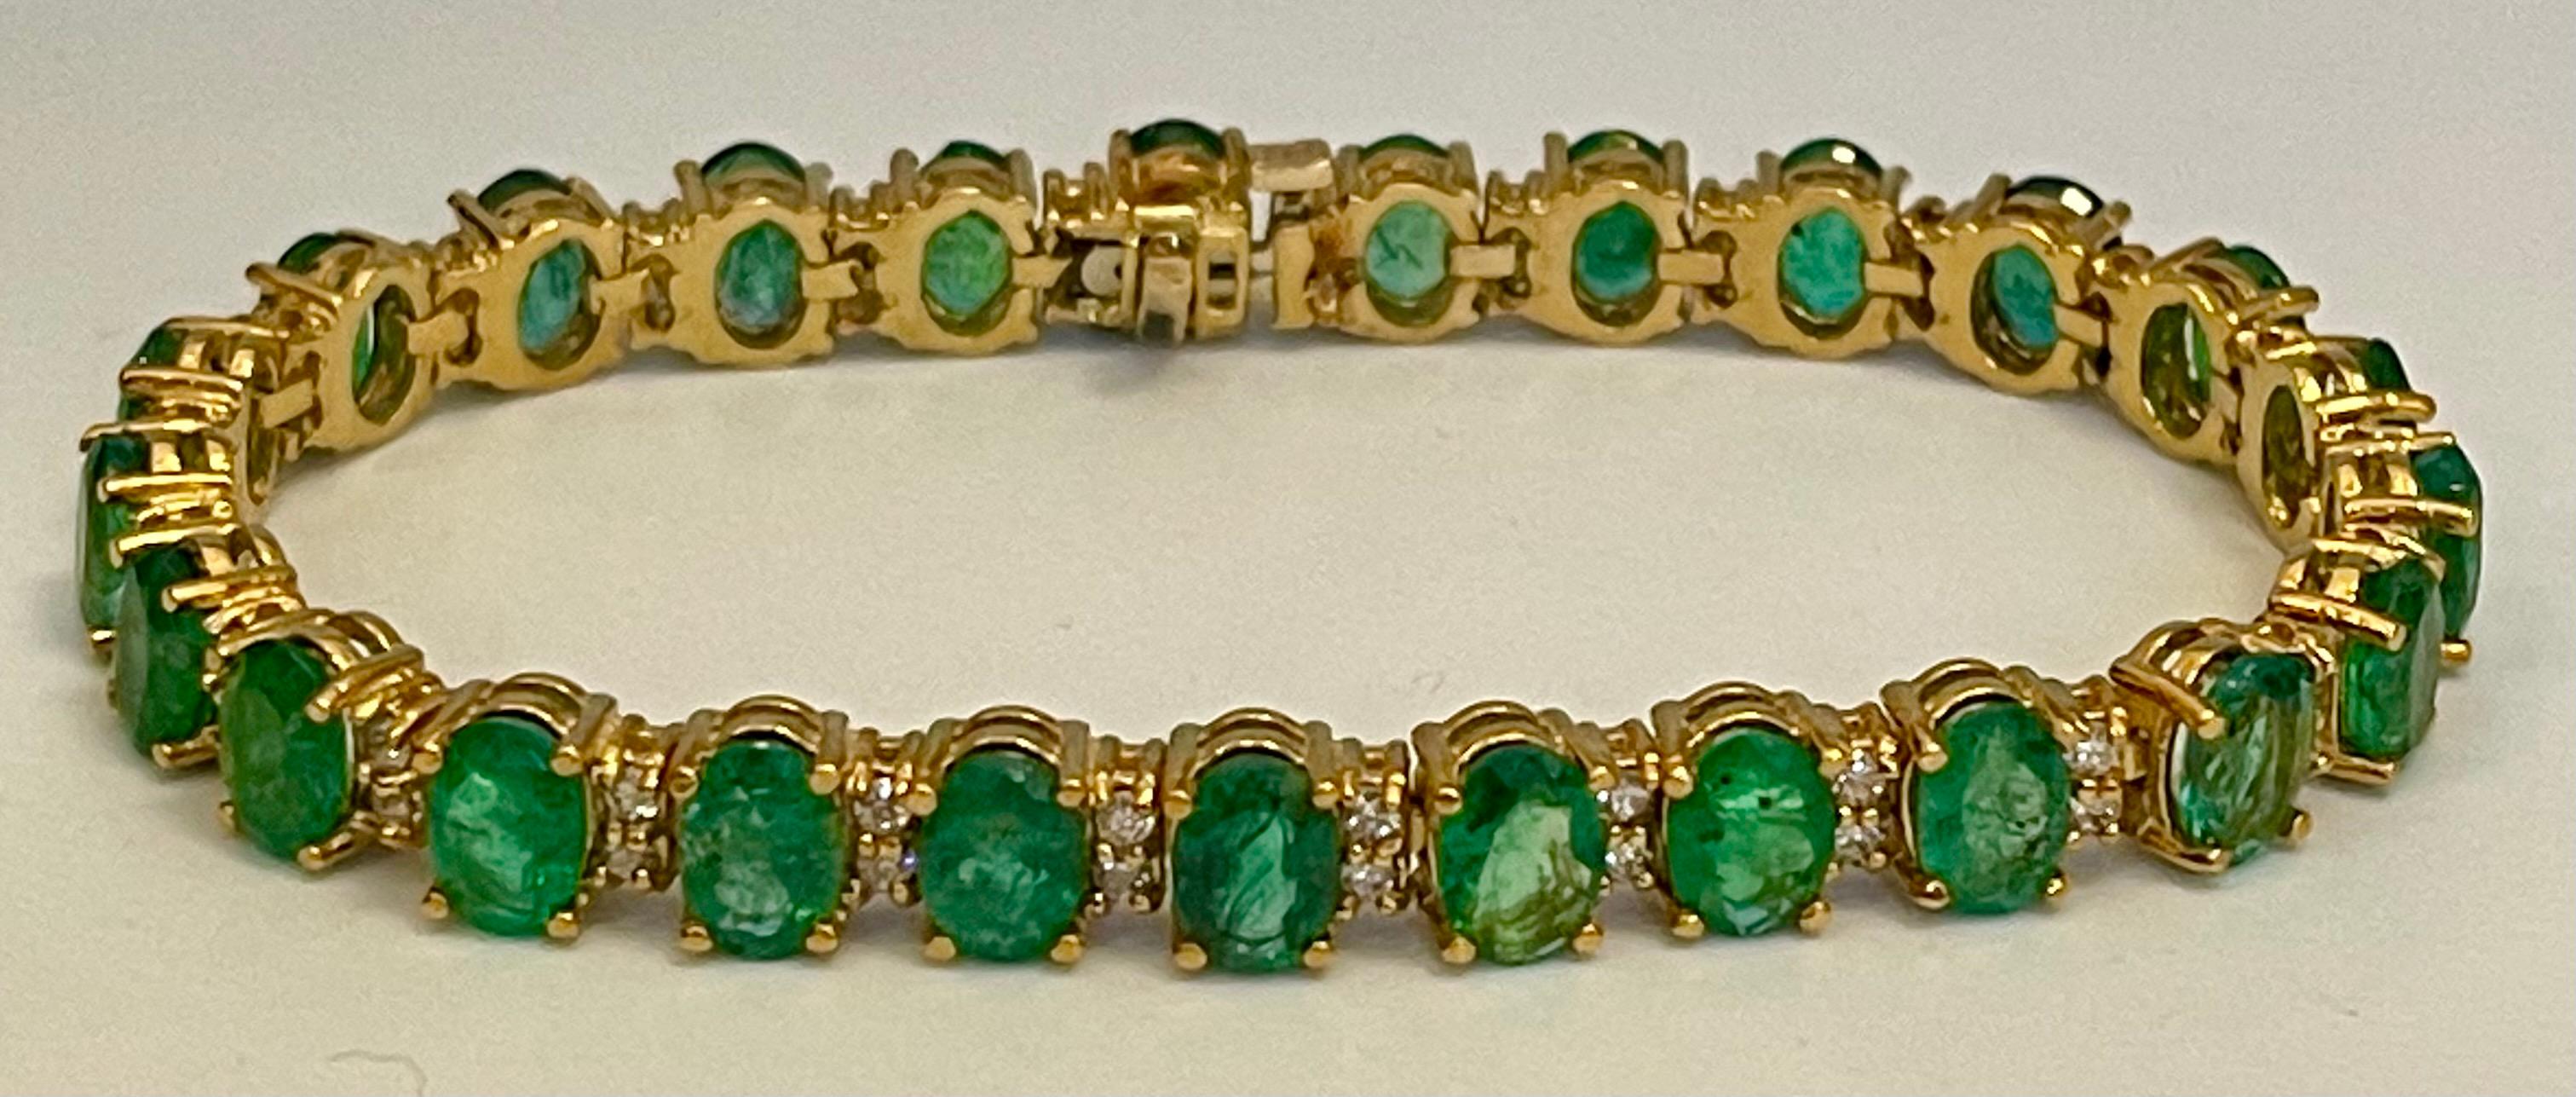 25 Carat Natural Emerald & 1.8 Carat Diamond Tennis Bracelet 18 Kt Yellow Gold In New Condition For Sale In New York, NY